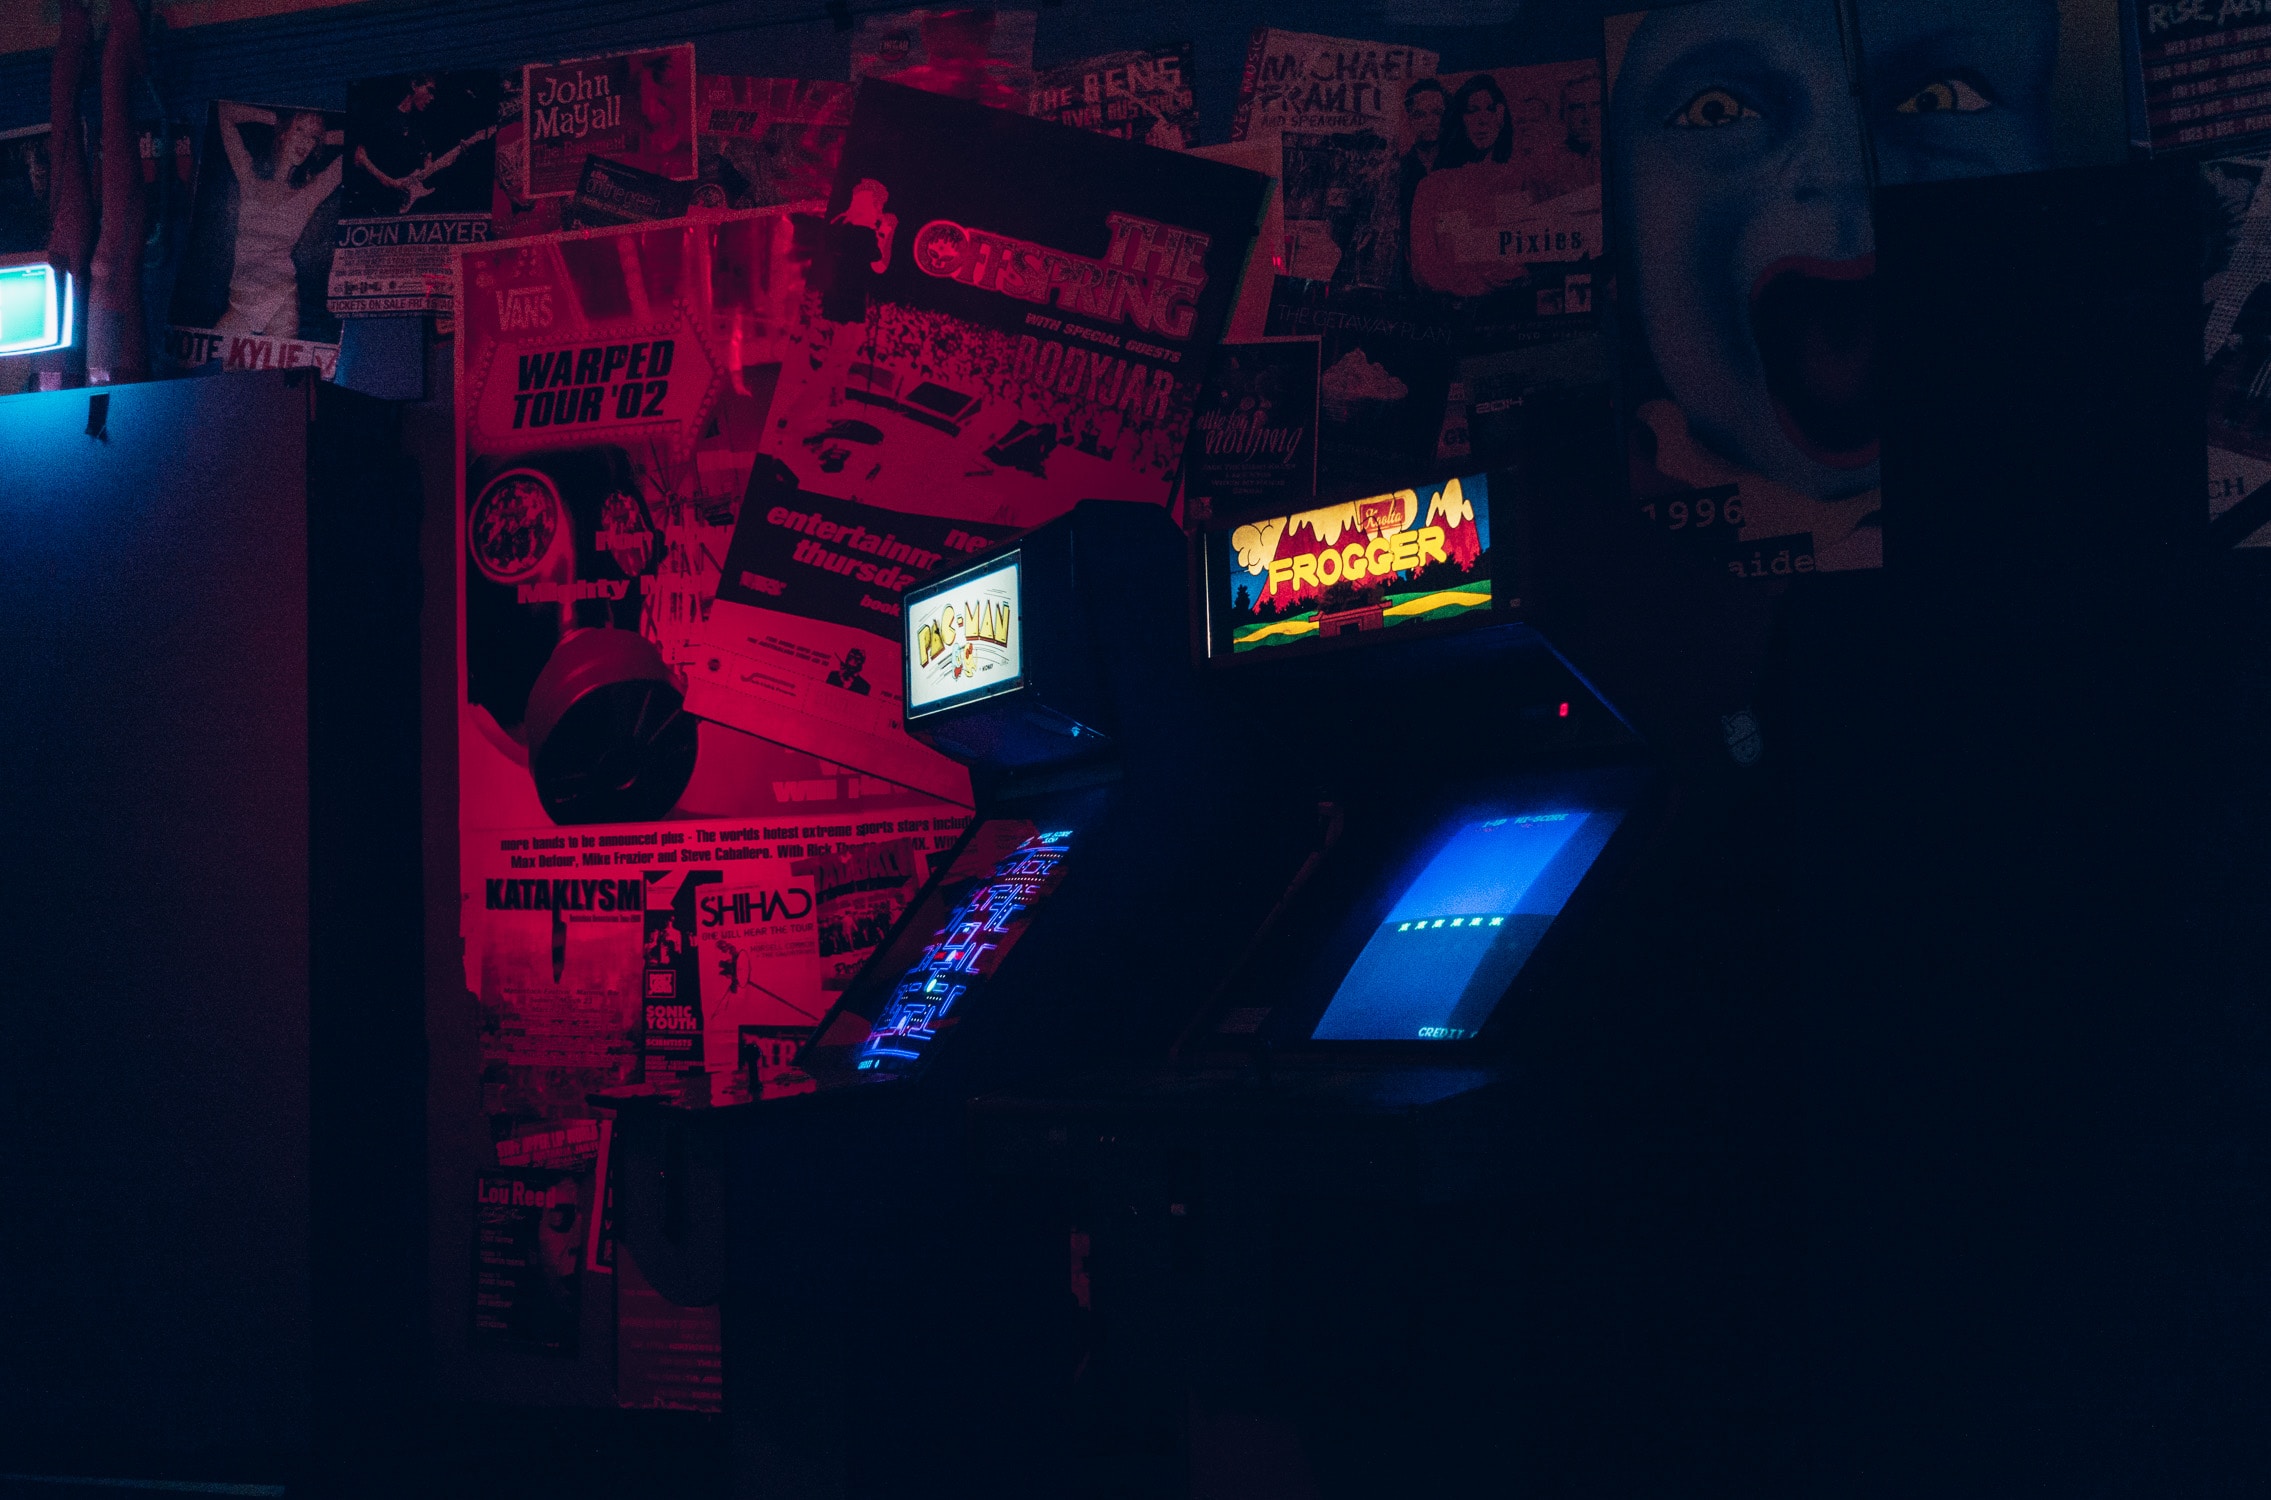 An arcade for man cave ideas. Pictured: An arcade room.